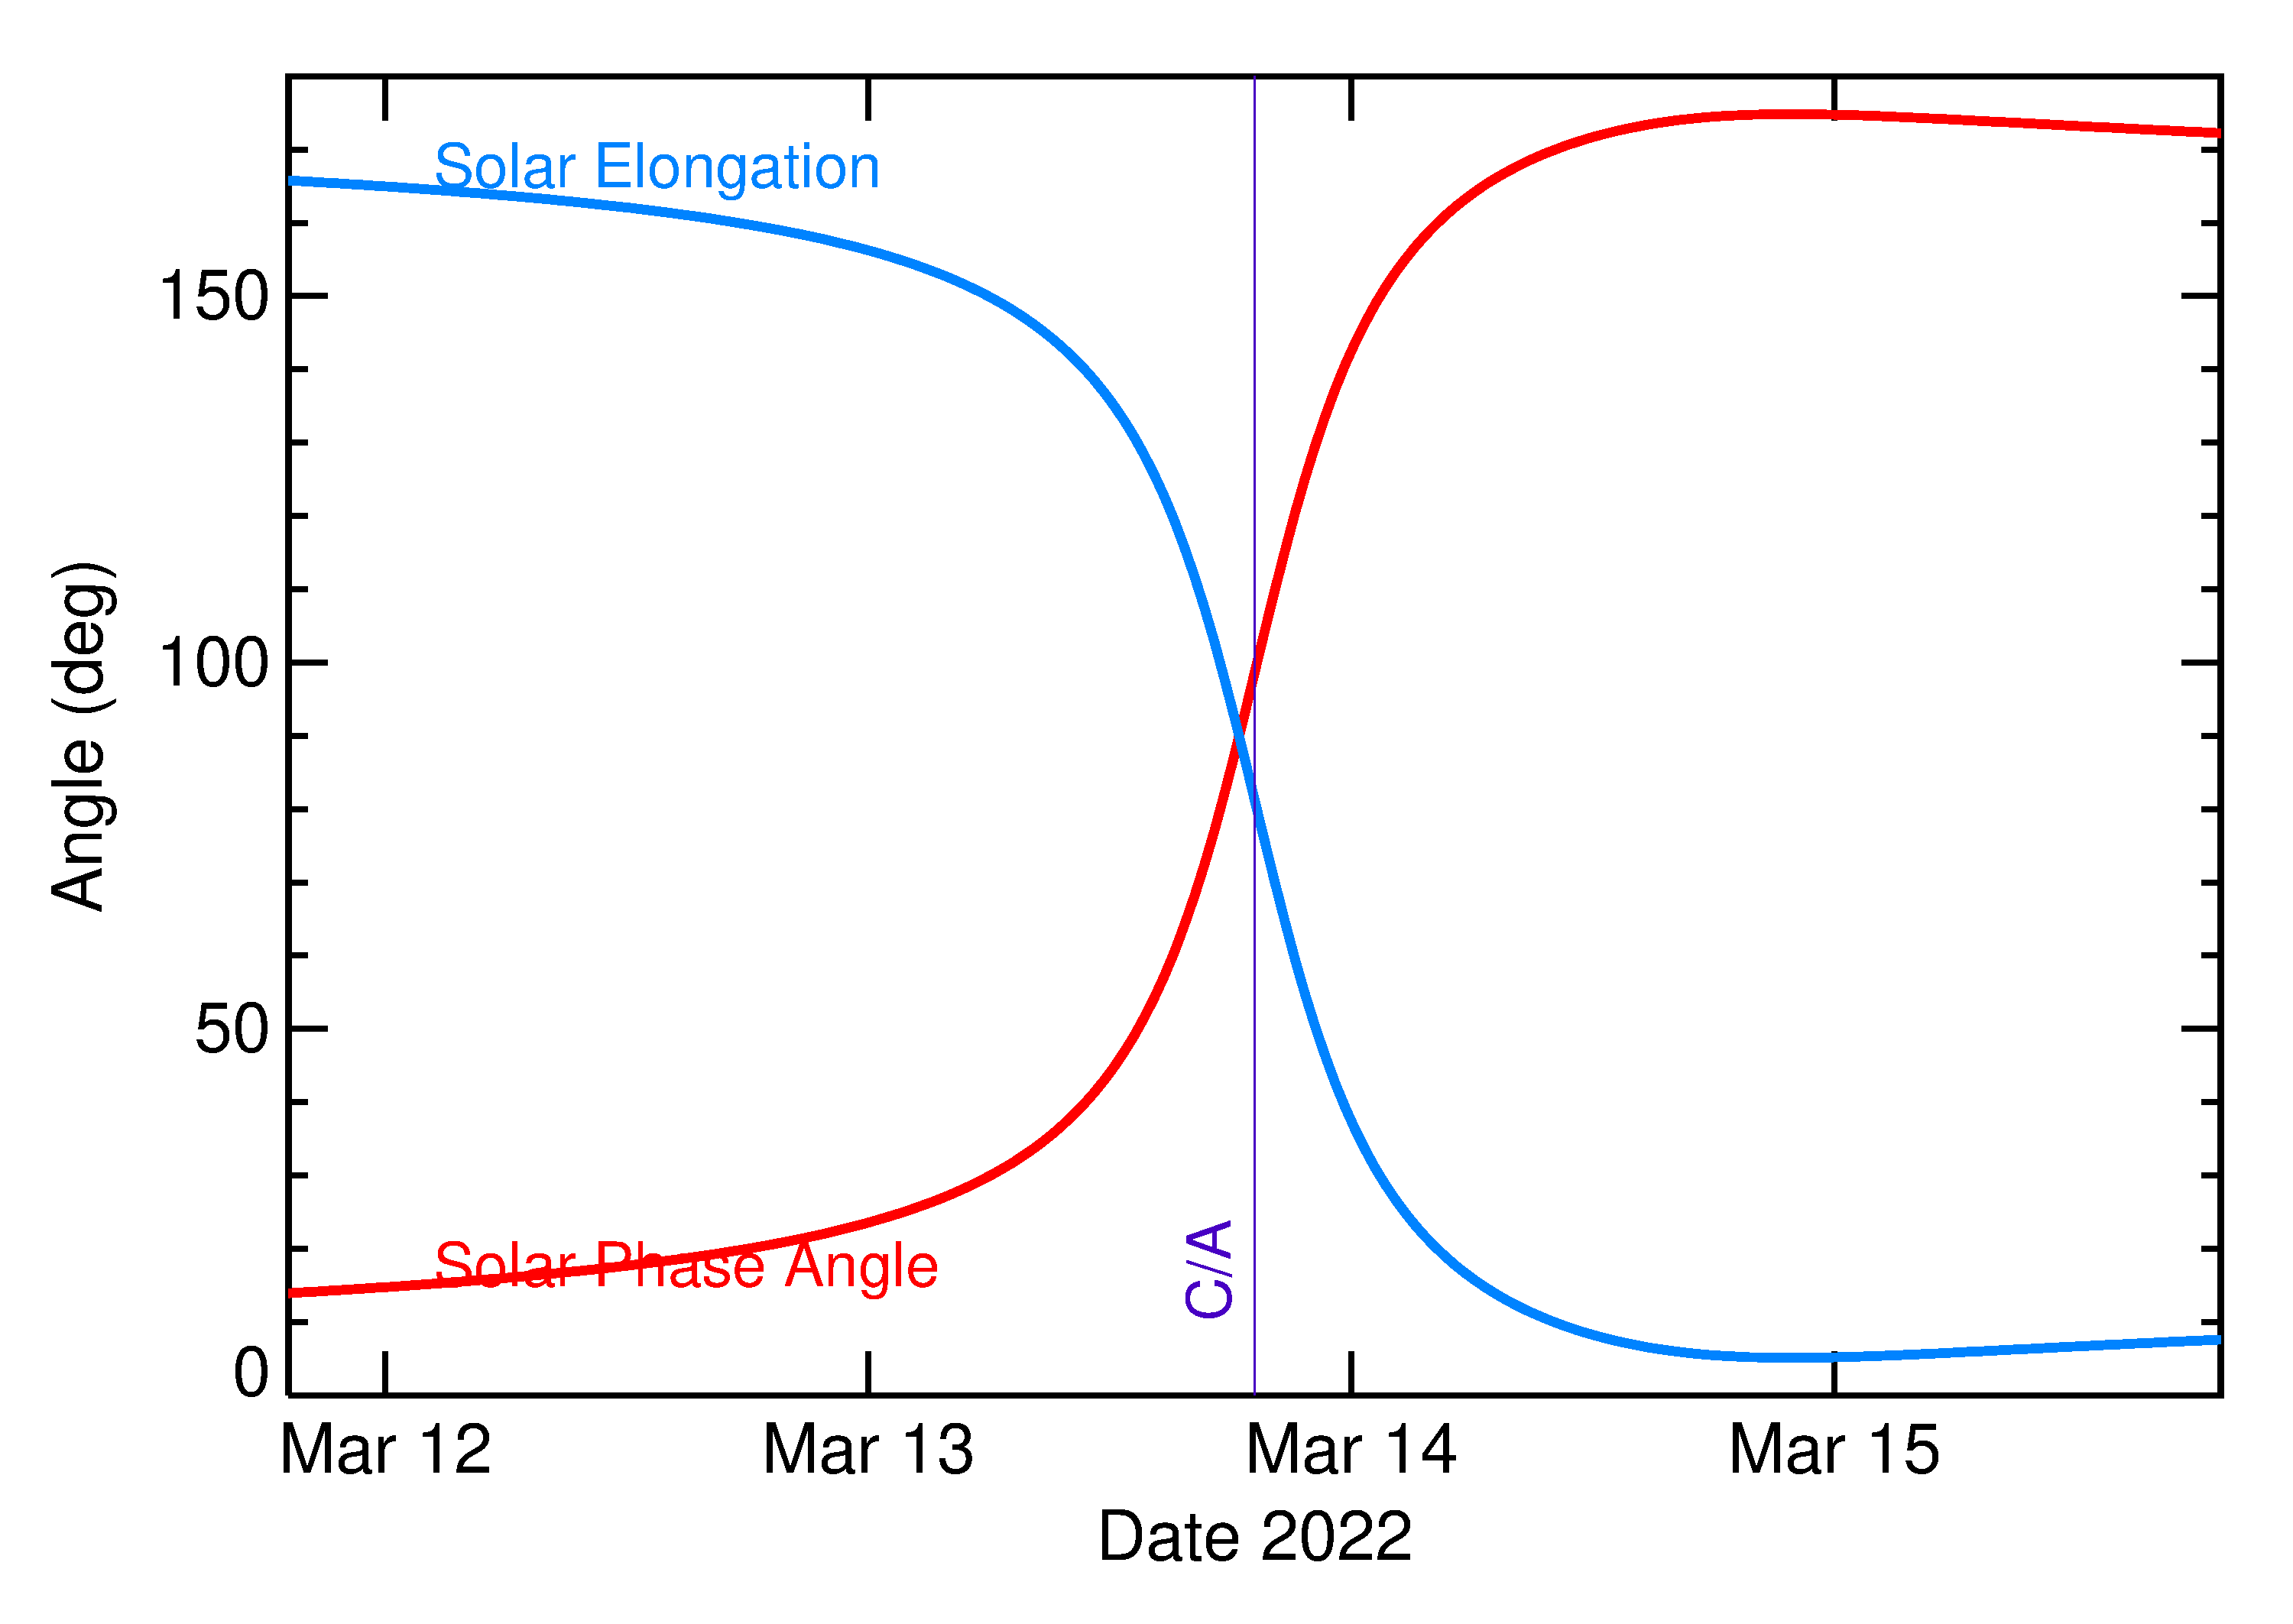 Solar Elongation and Solar Phase Angle of 2022 ES3 in the days around closest approach